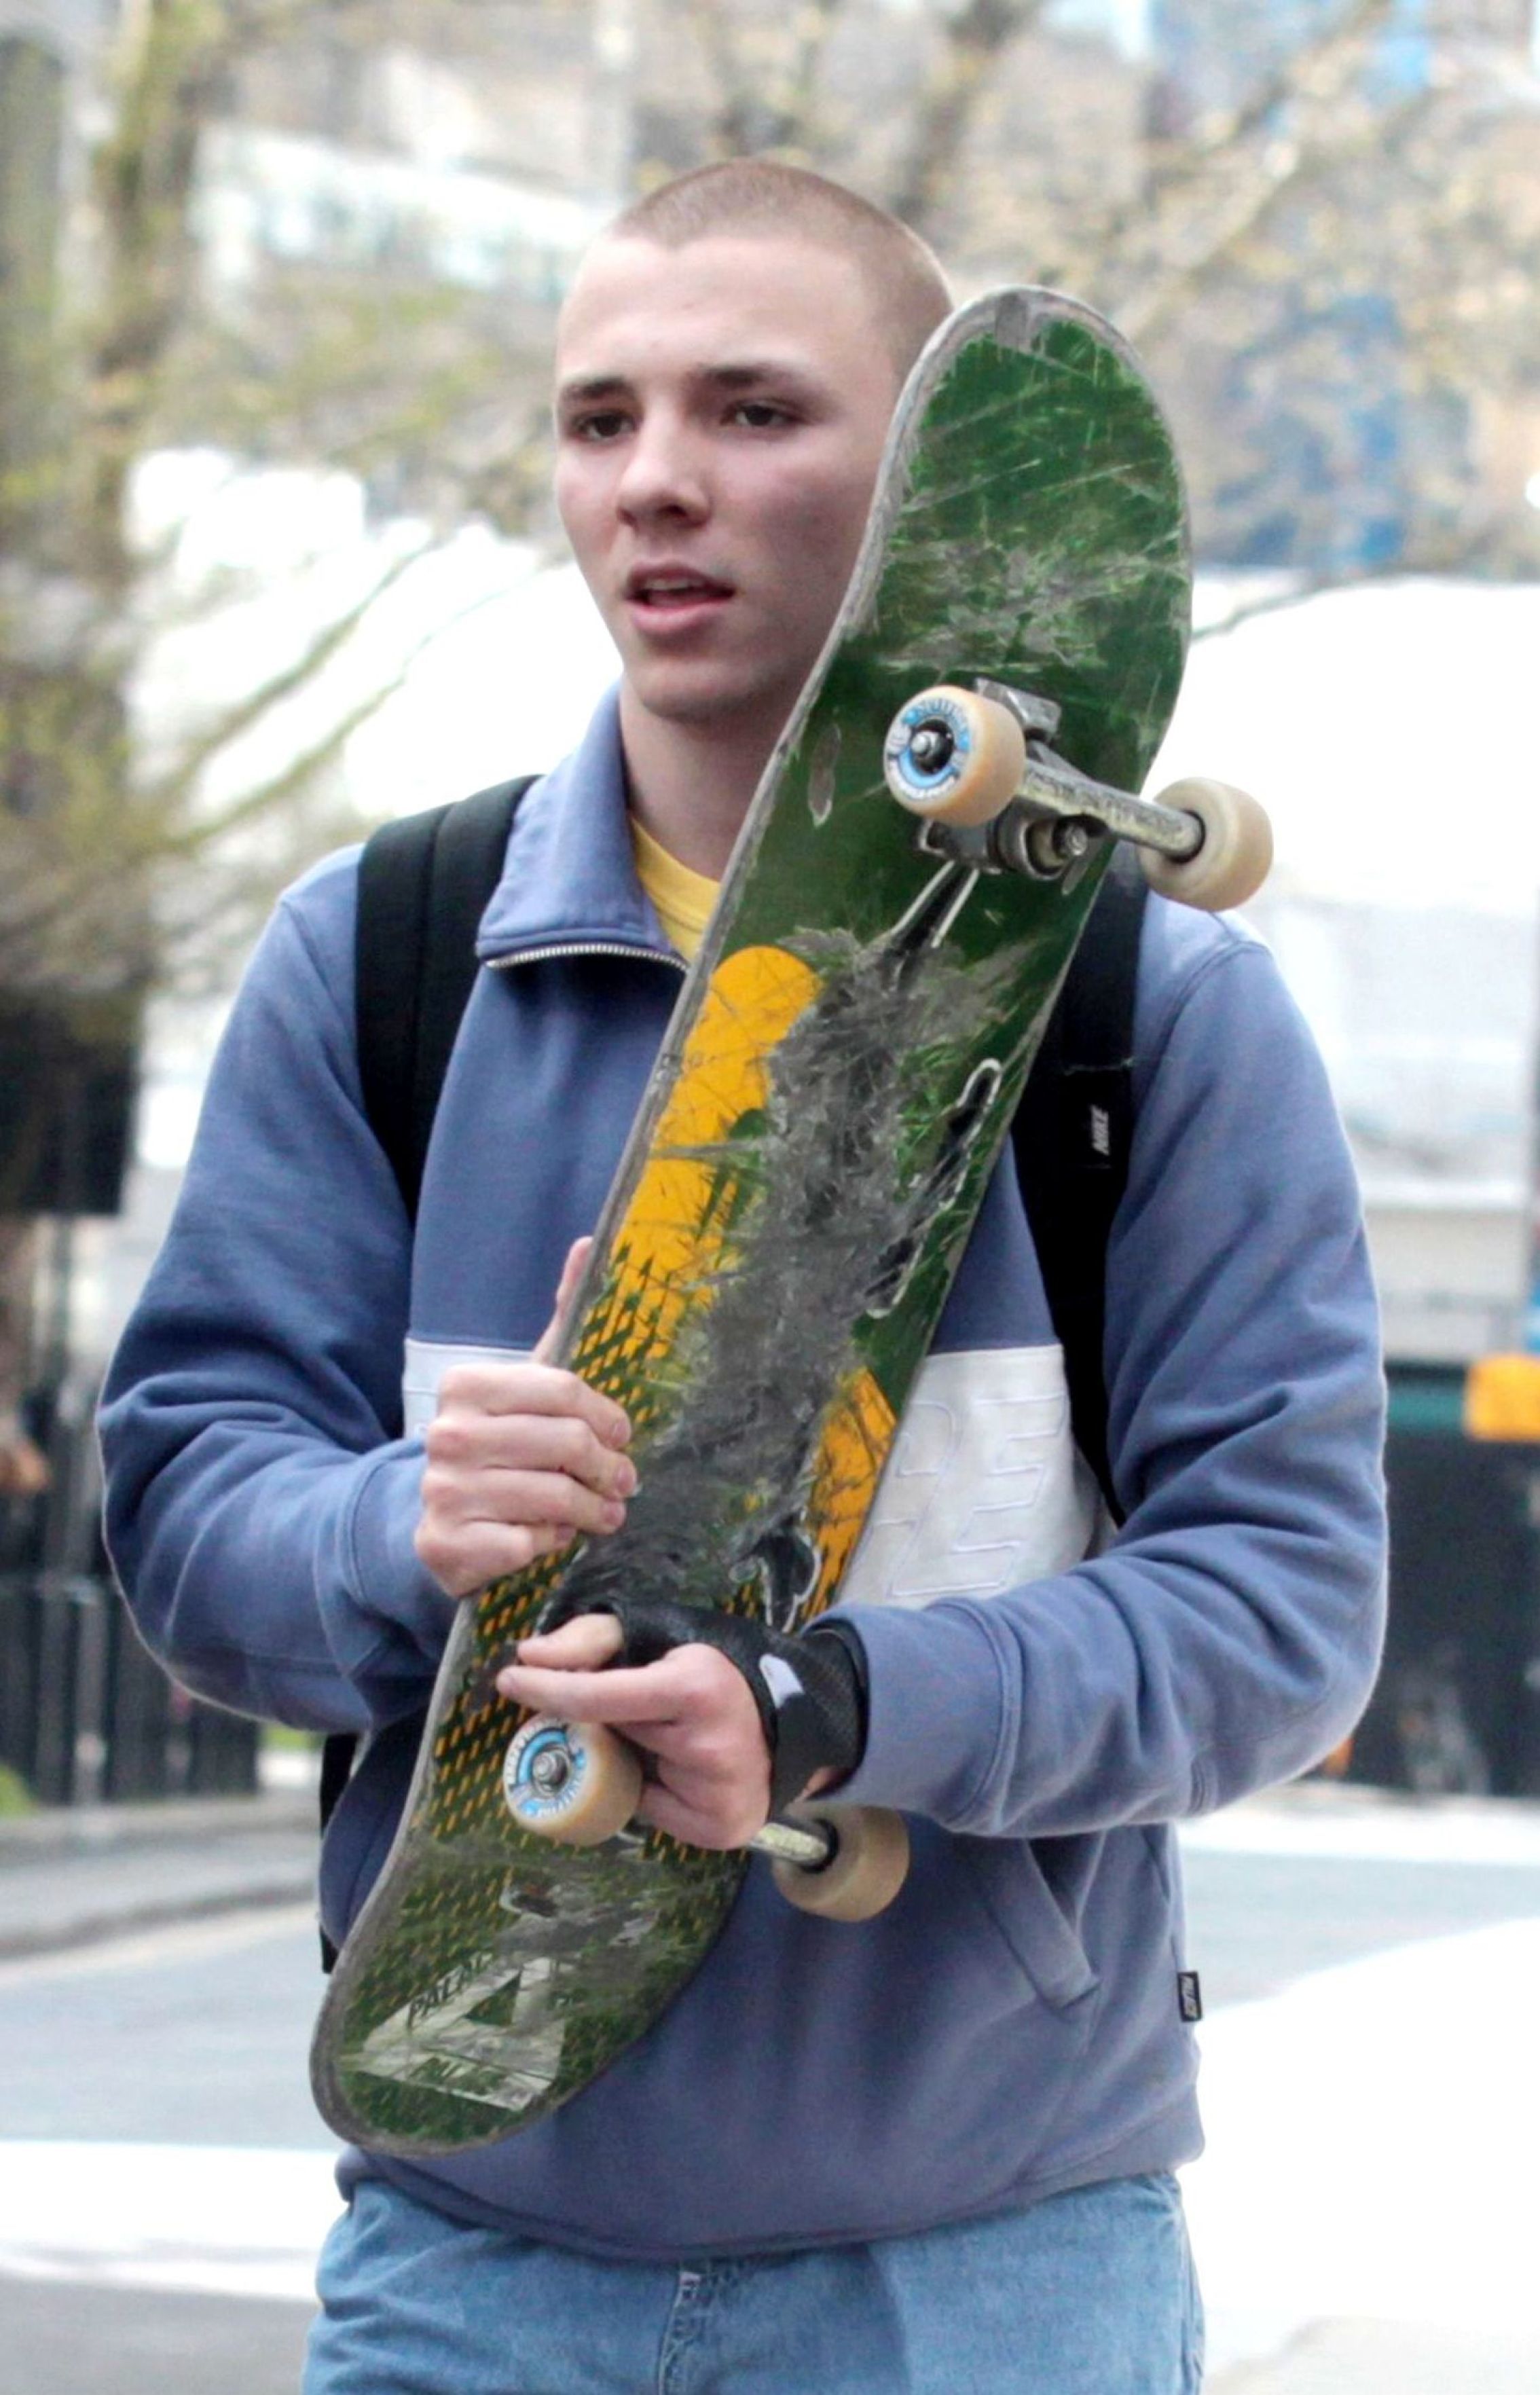 Rocco Ritchie was spotted 'drinking and smoking' under a bridge in